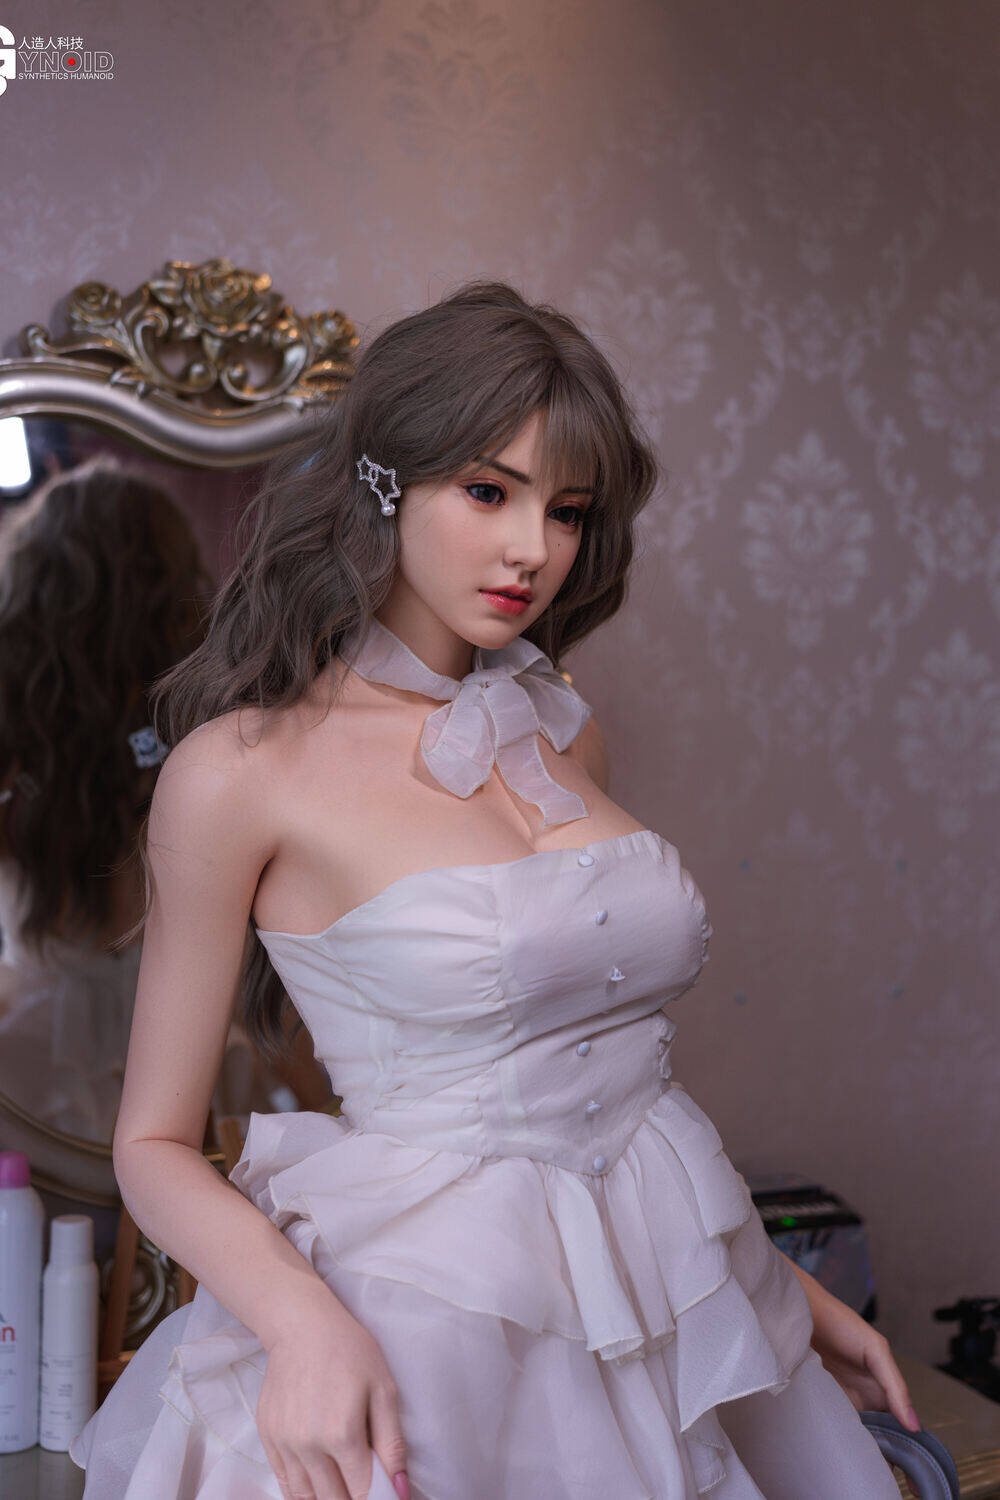 Mariana-163cm(5ft4) Gynoid Adult Doll E-Cup Normal Skin Tone Big Boobs Silicone Dolls image4